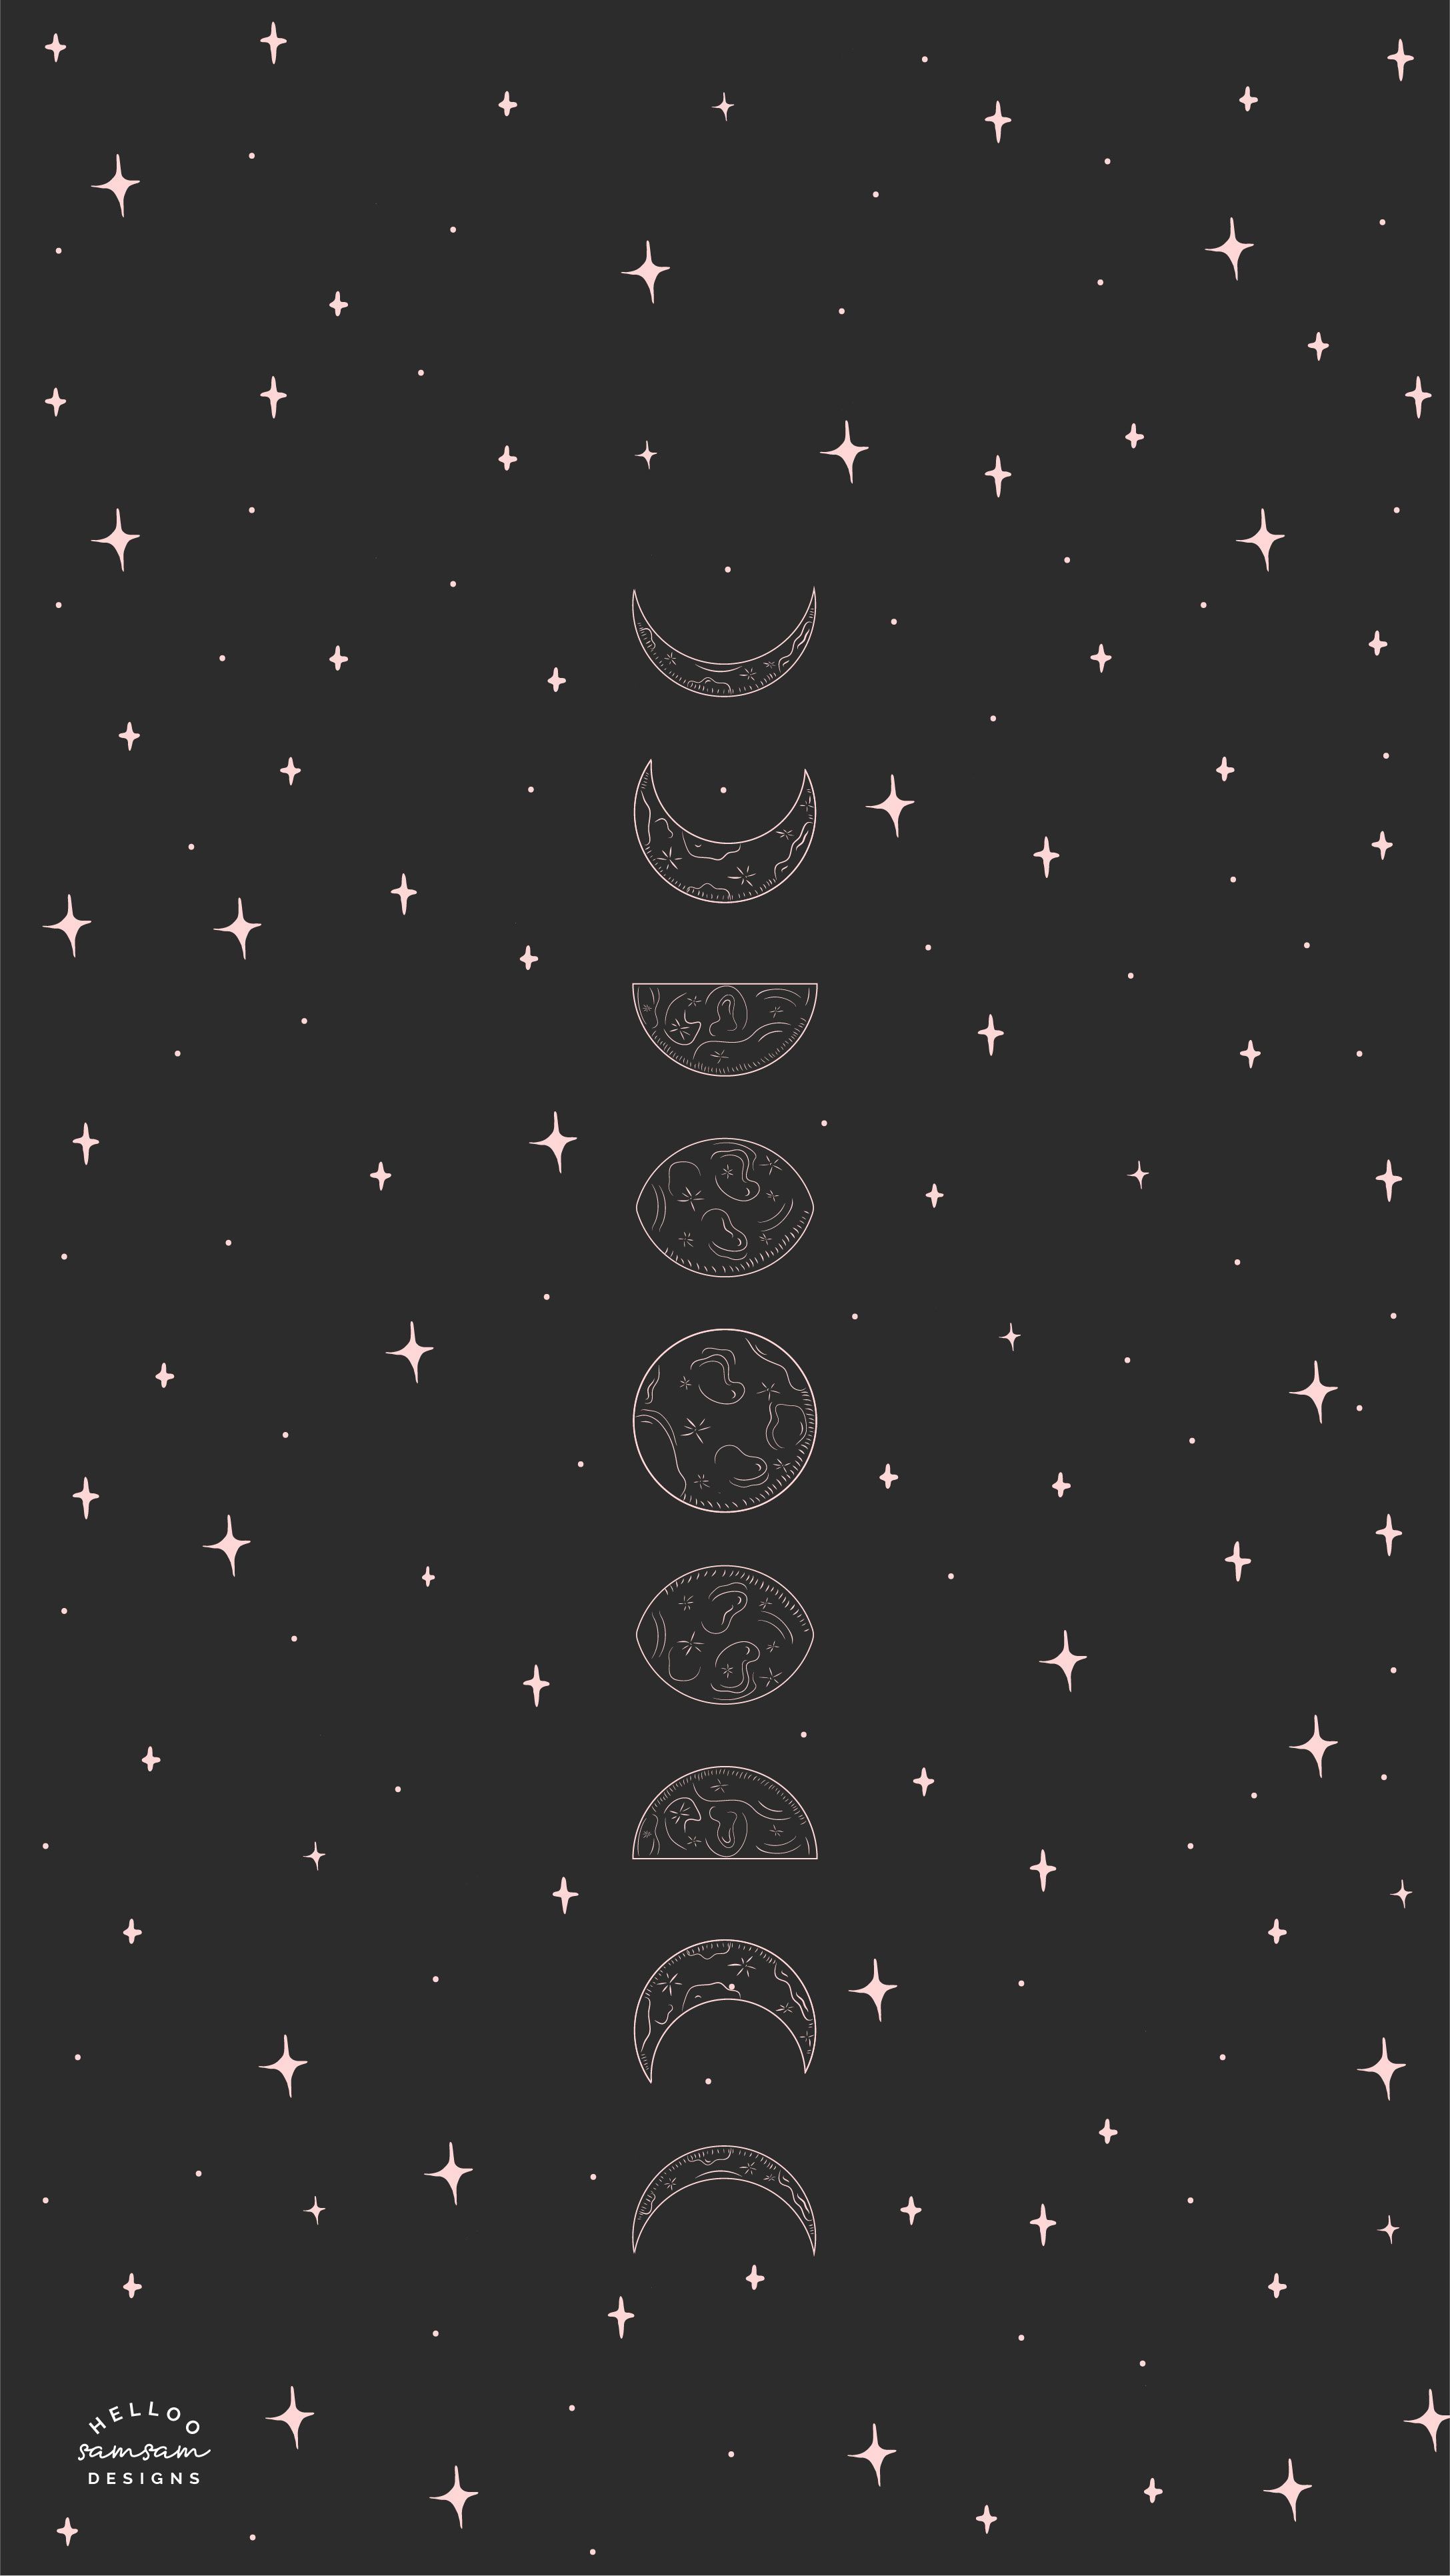 Moon Phases Phone Wallpaper. Witchy wallpaper, Phone wallpaper, Background phone wallpaper